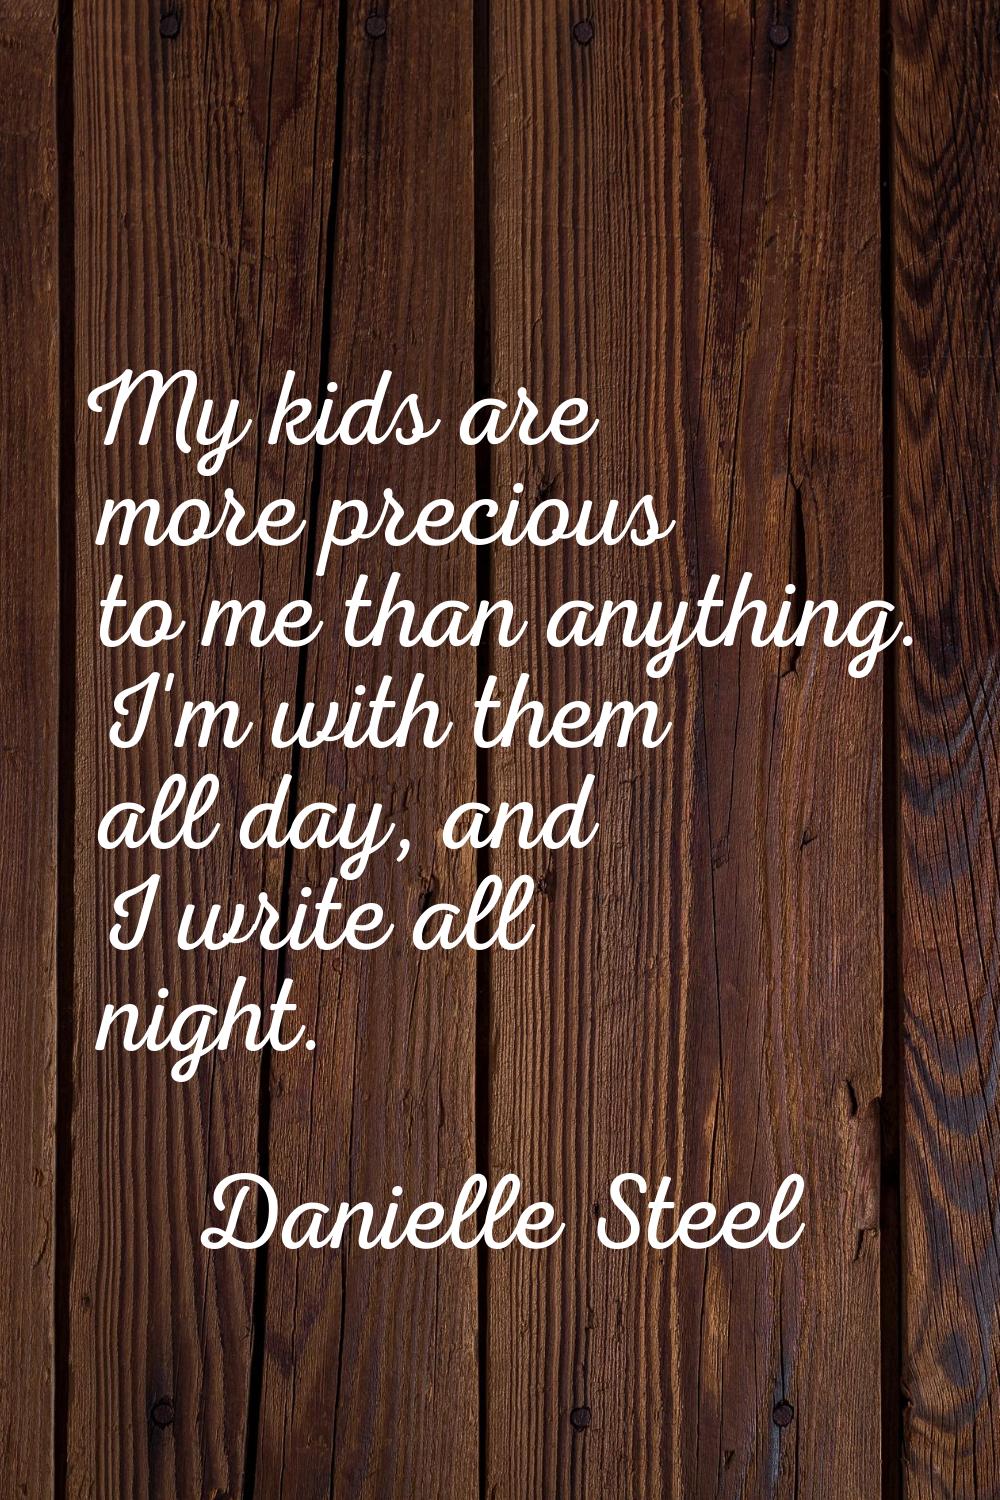 My kids are more precious to me than anything. I'm with them all day, and I write all night.